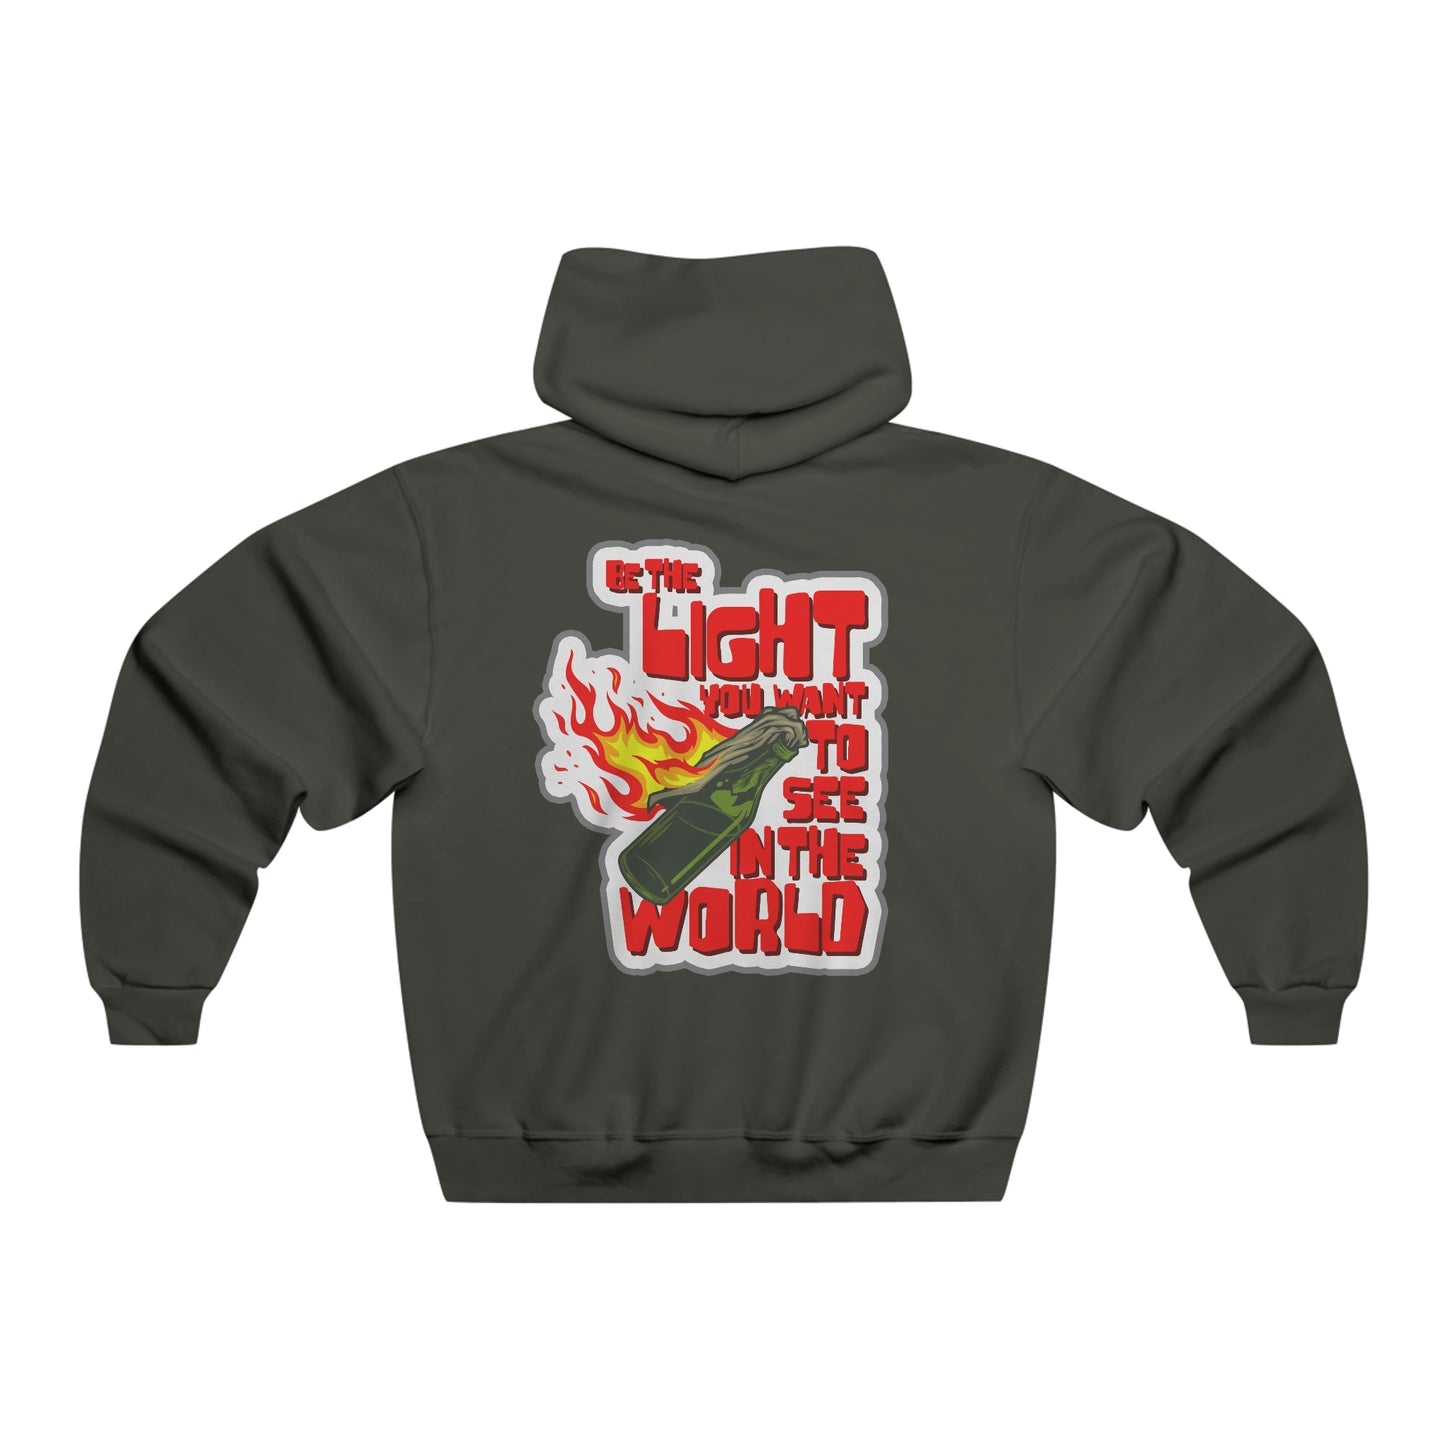 Be the light you want to see in the world - Hooded Sweatshirt